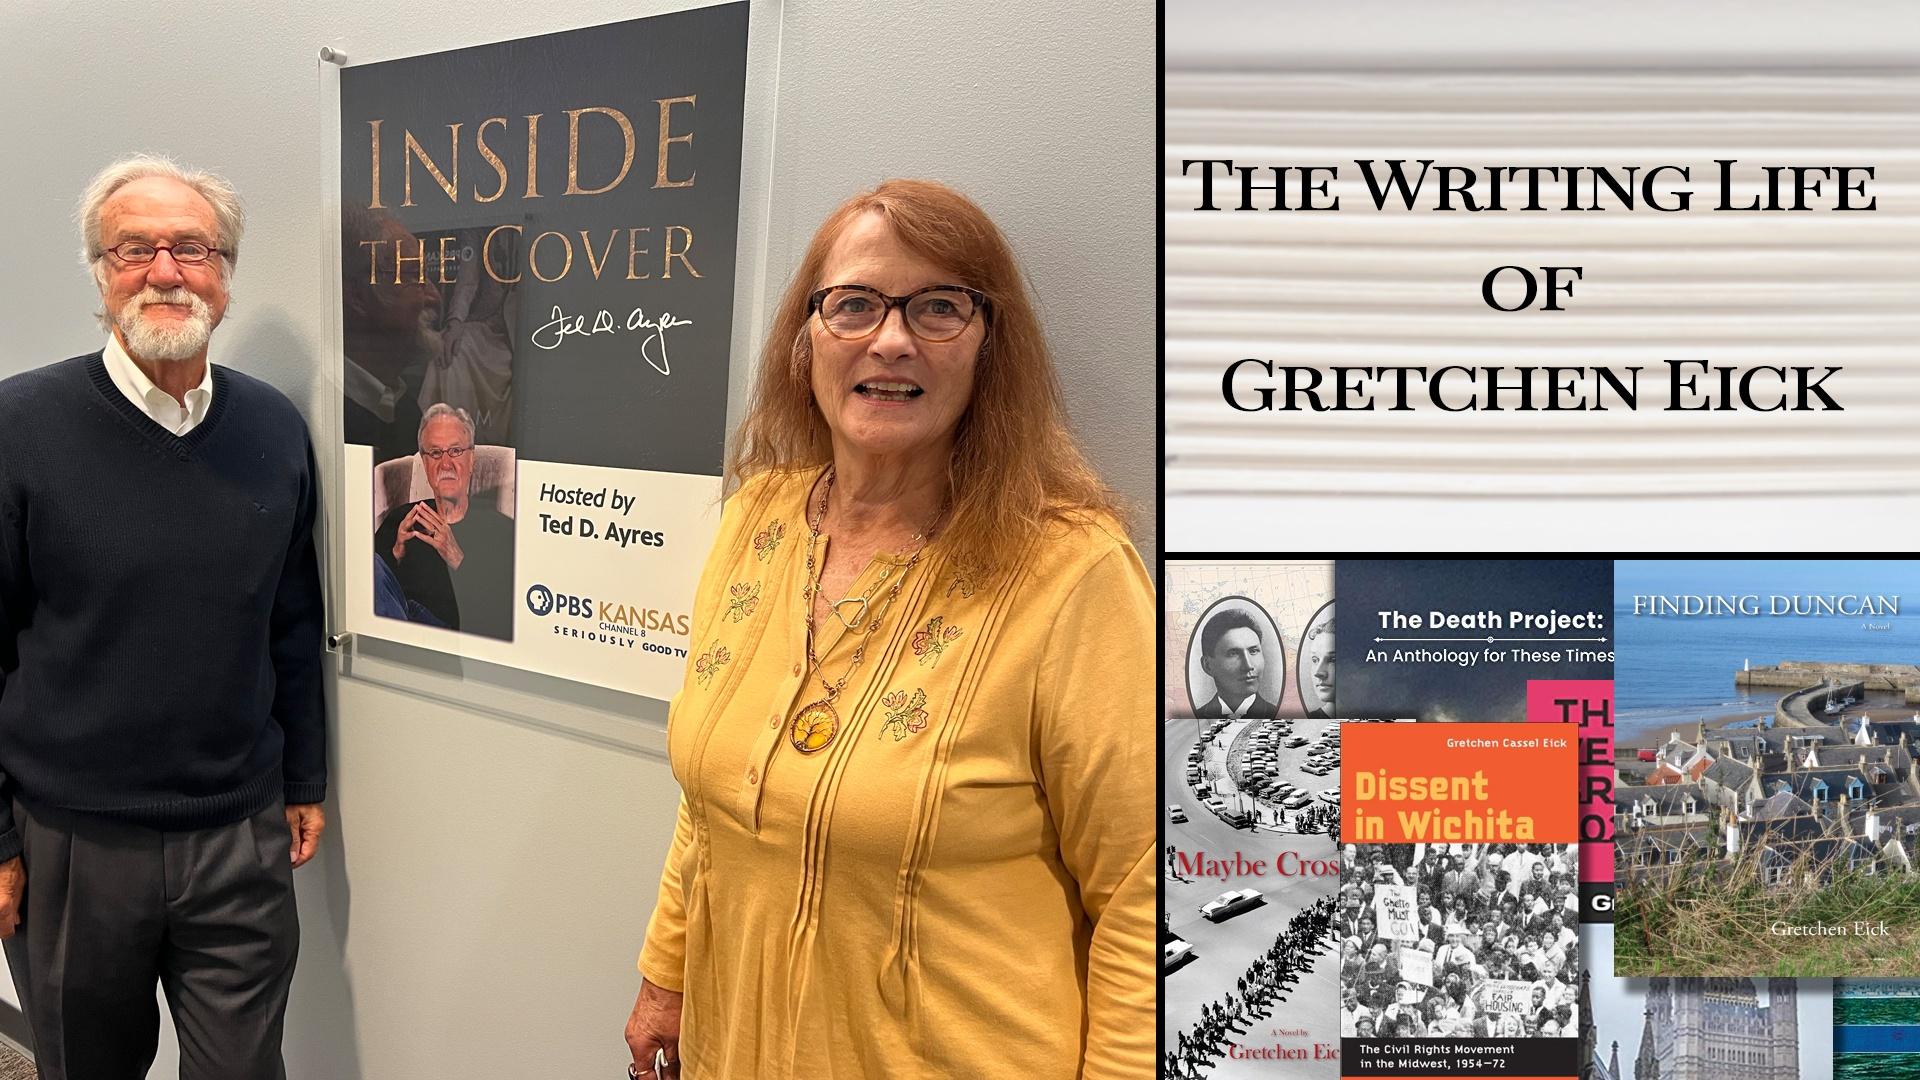 The Writing Life of Gretchen Eick